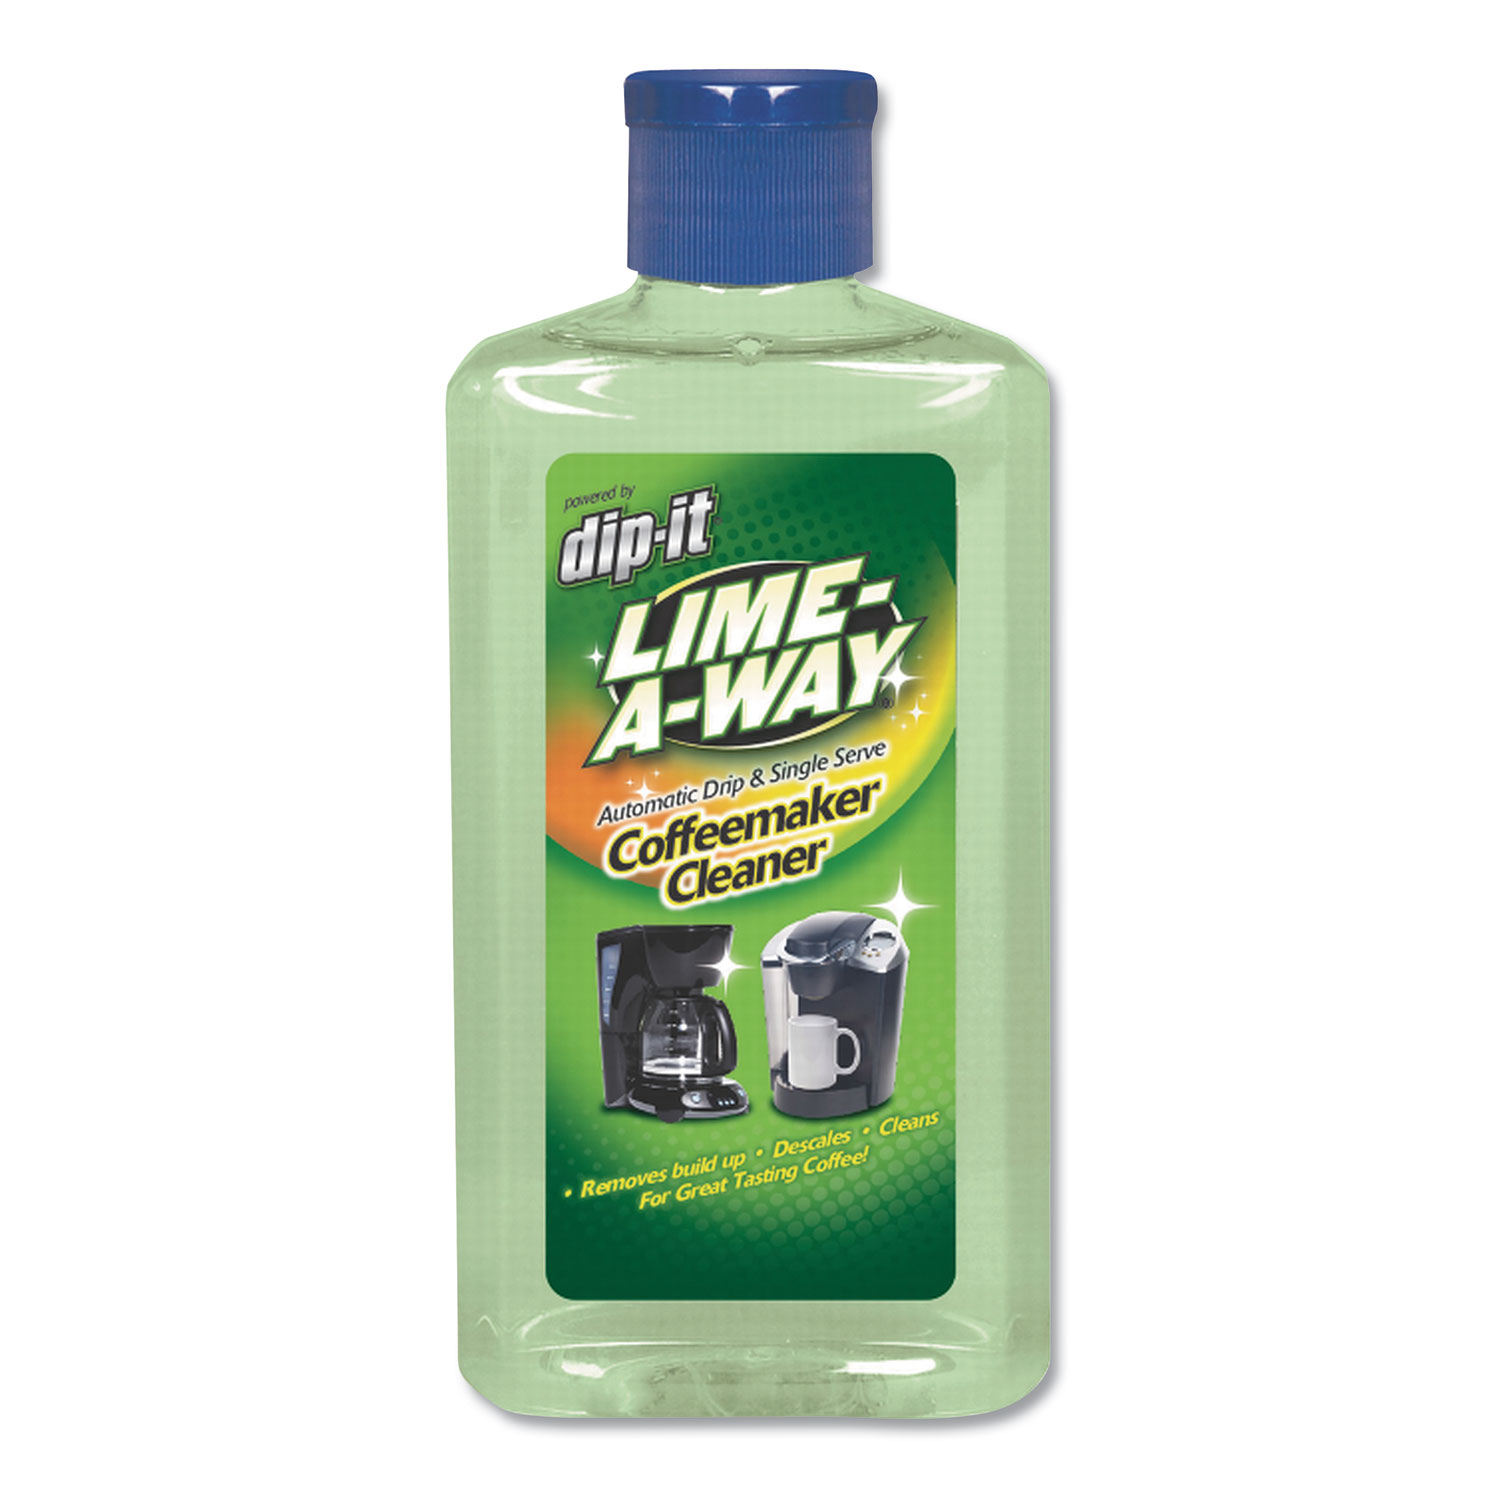  LIME-A-WAY 27443-36320 Dip-It Coffeemaker Descaler and Cleaner, 7 oz Bottle, 8/Carton (RAC36320CT) 